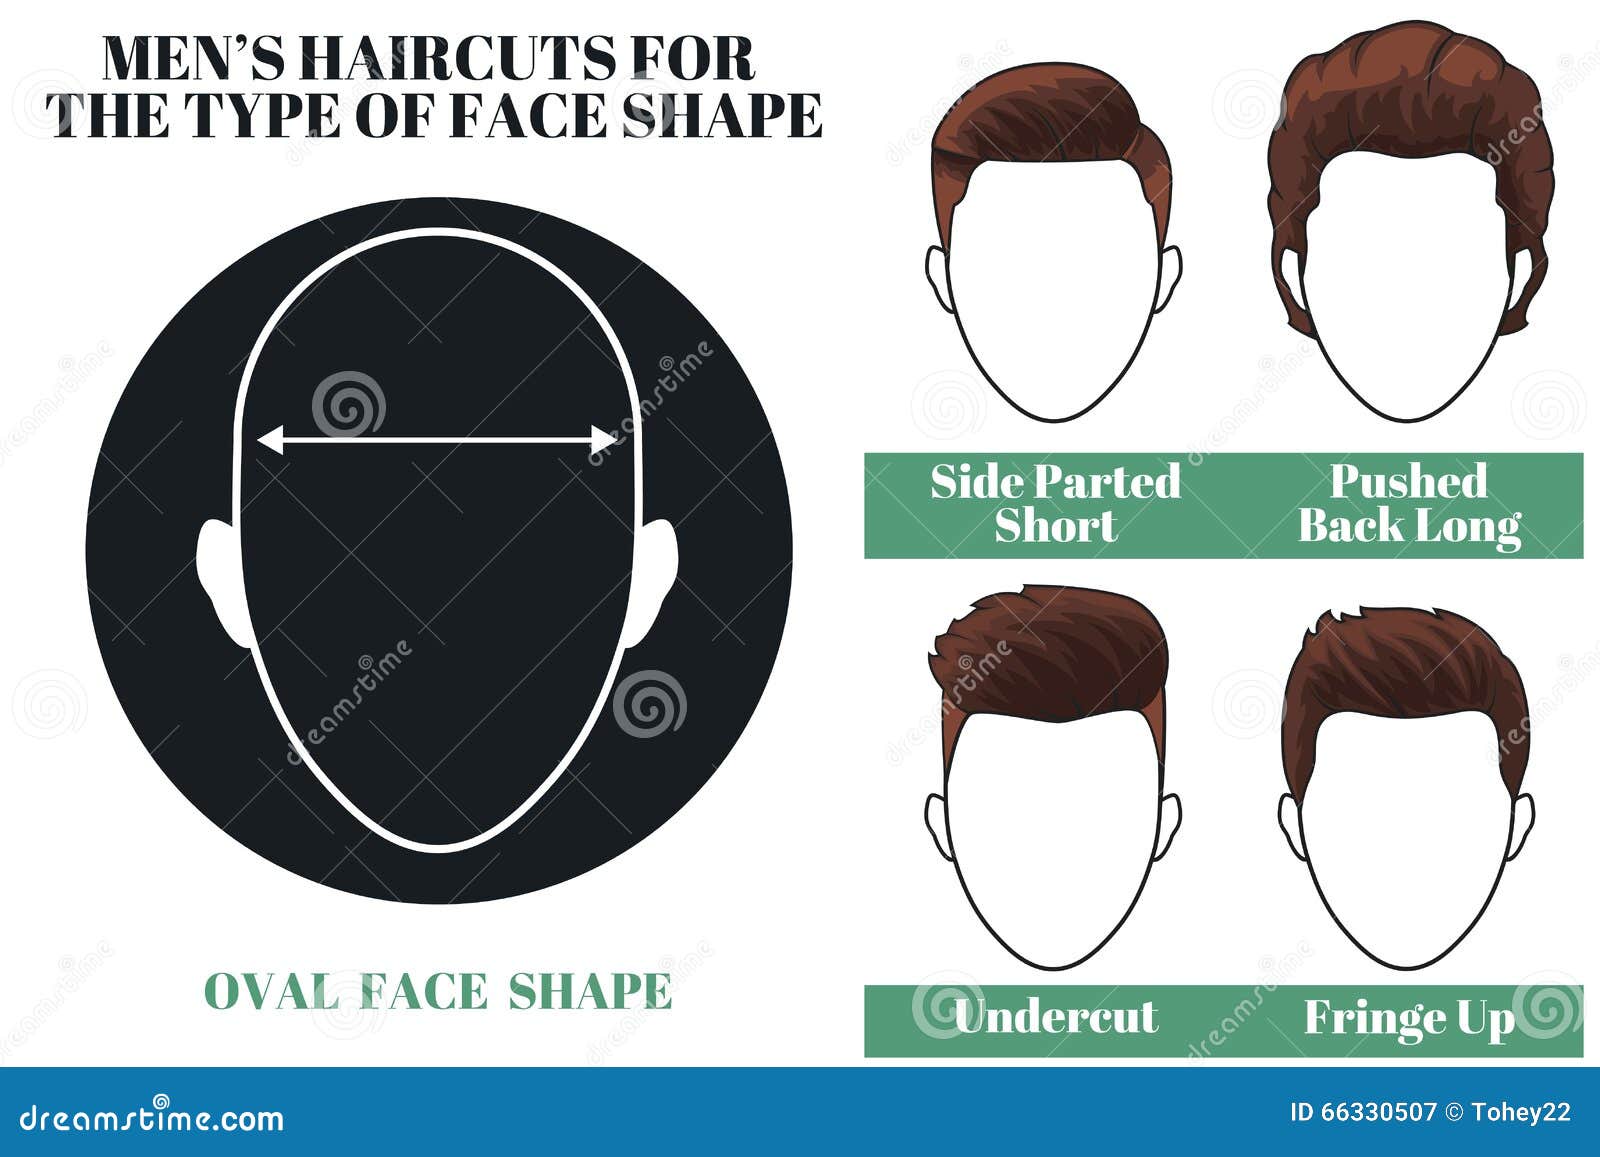 Hairstyles Oval Faces Photos and Images | Shutterstock